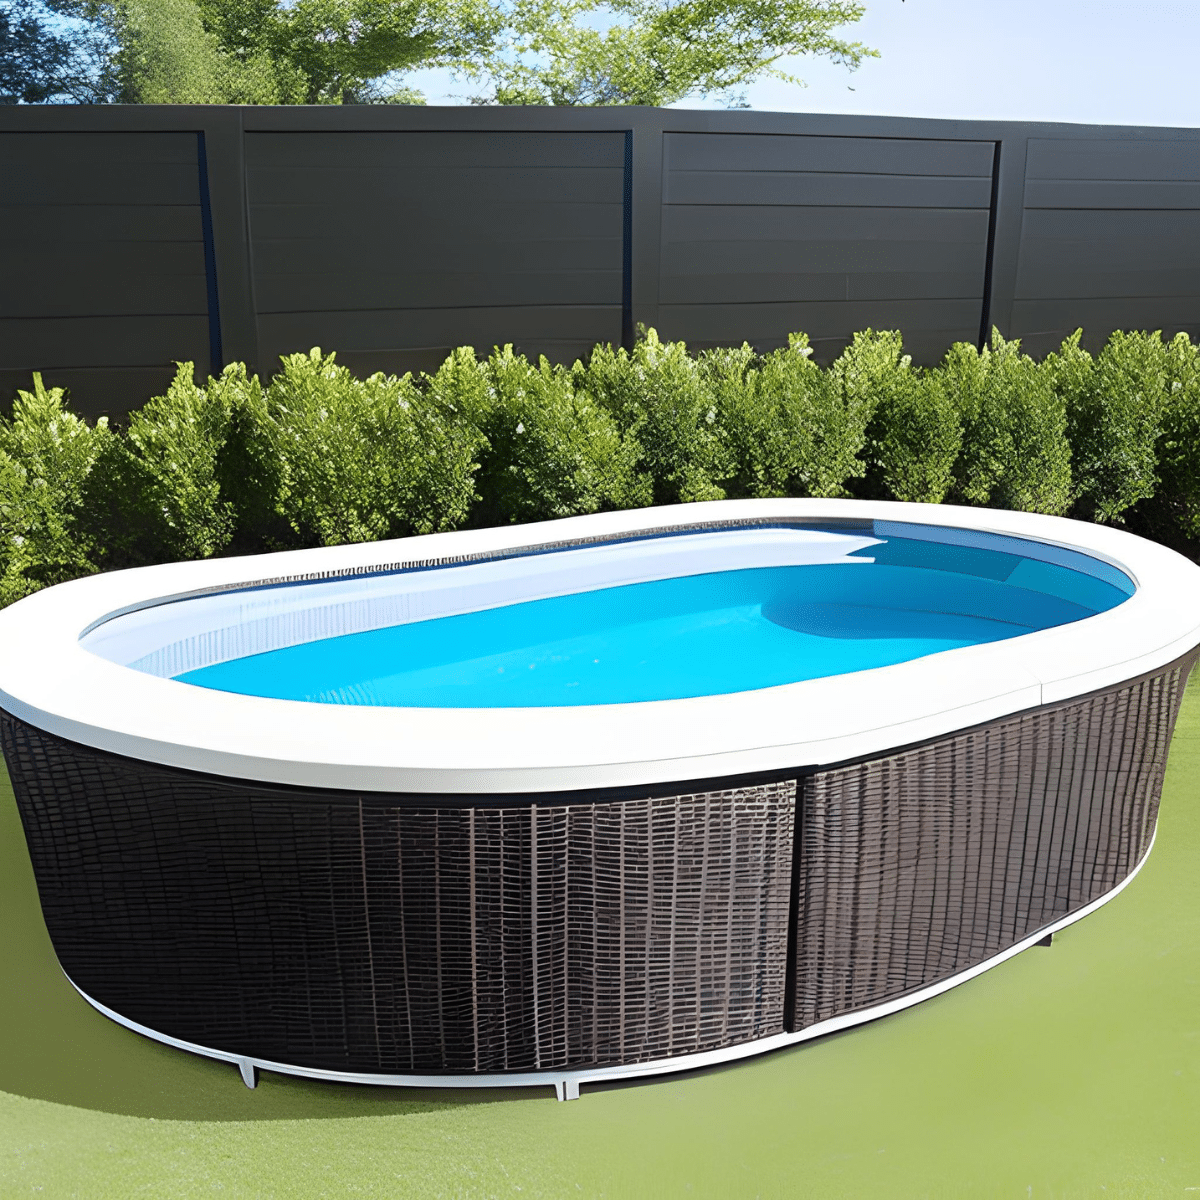 Rattan above-ground pool near a fence